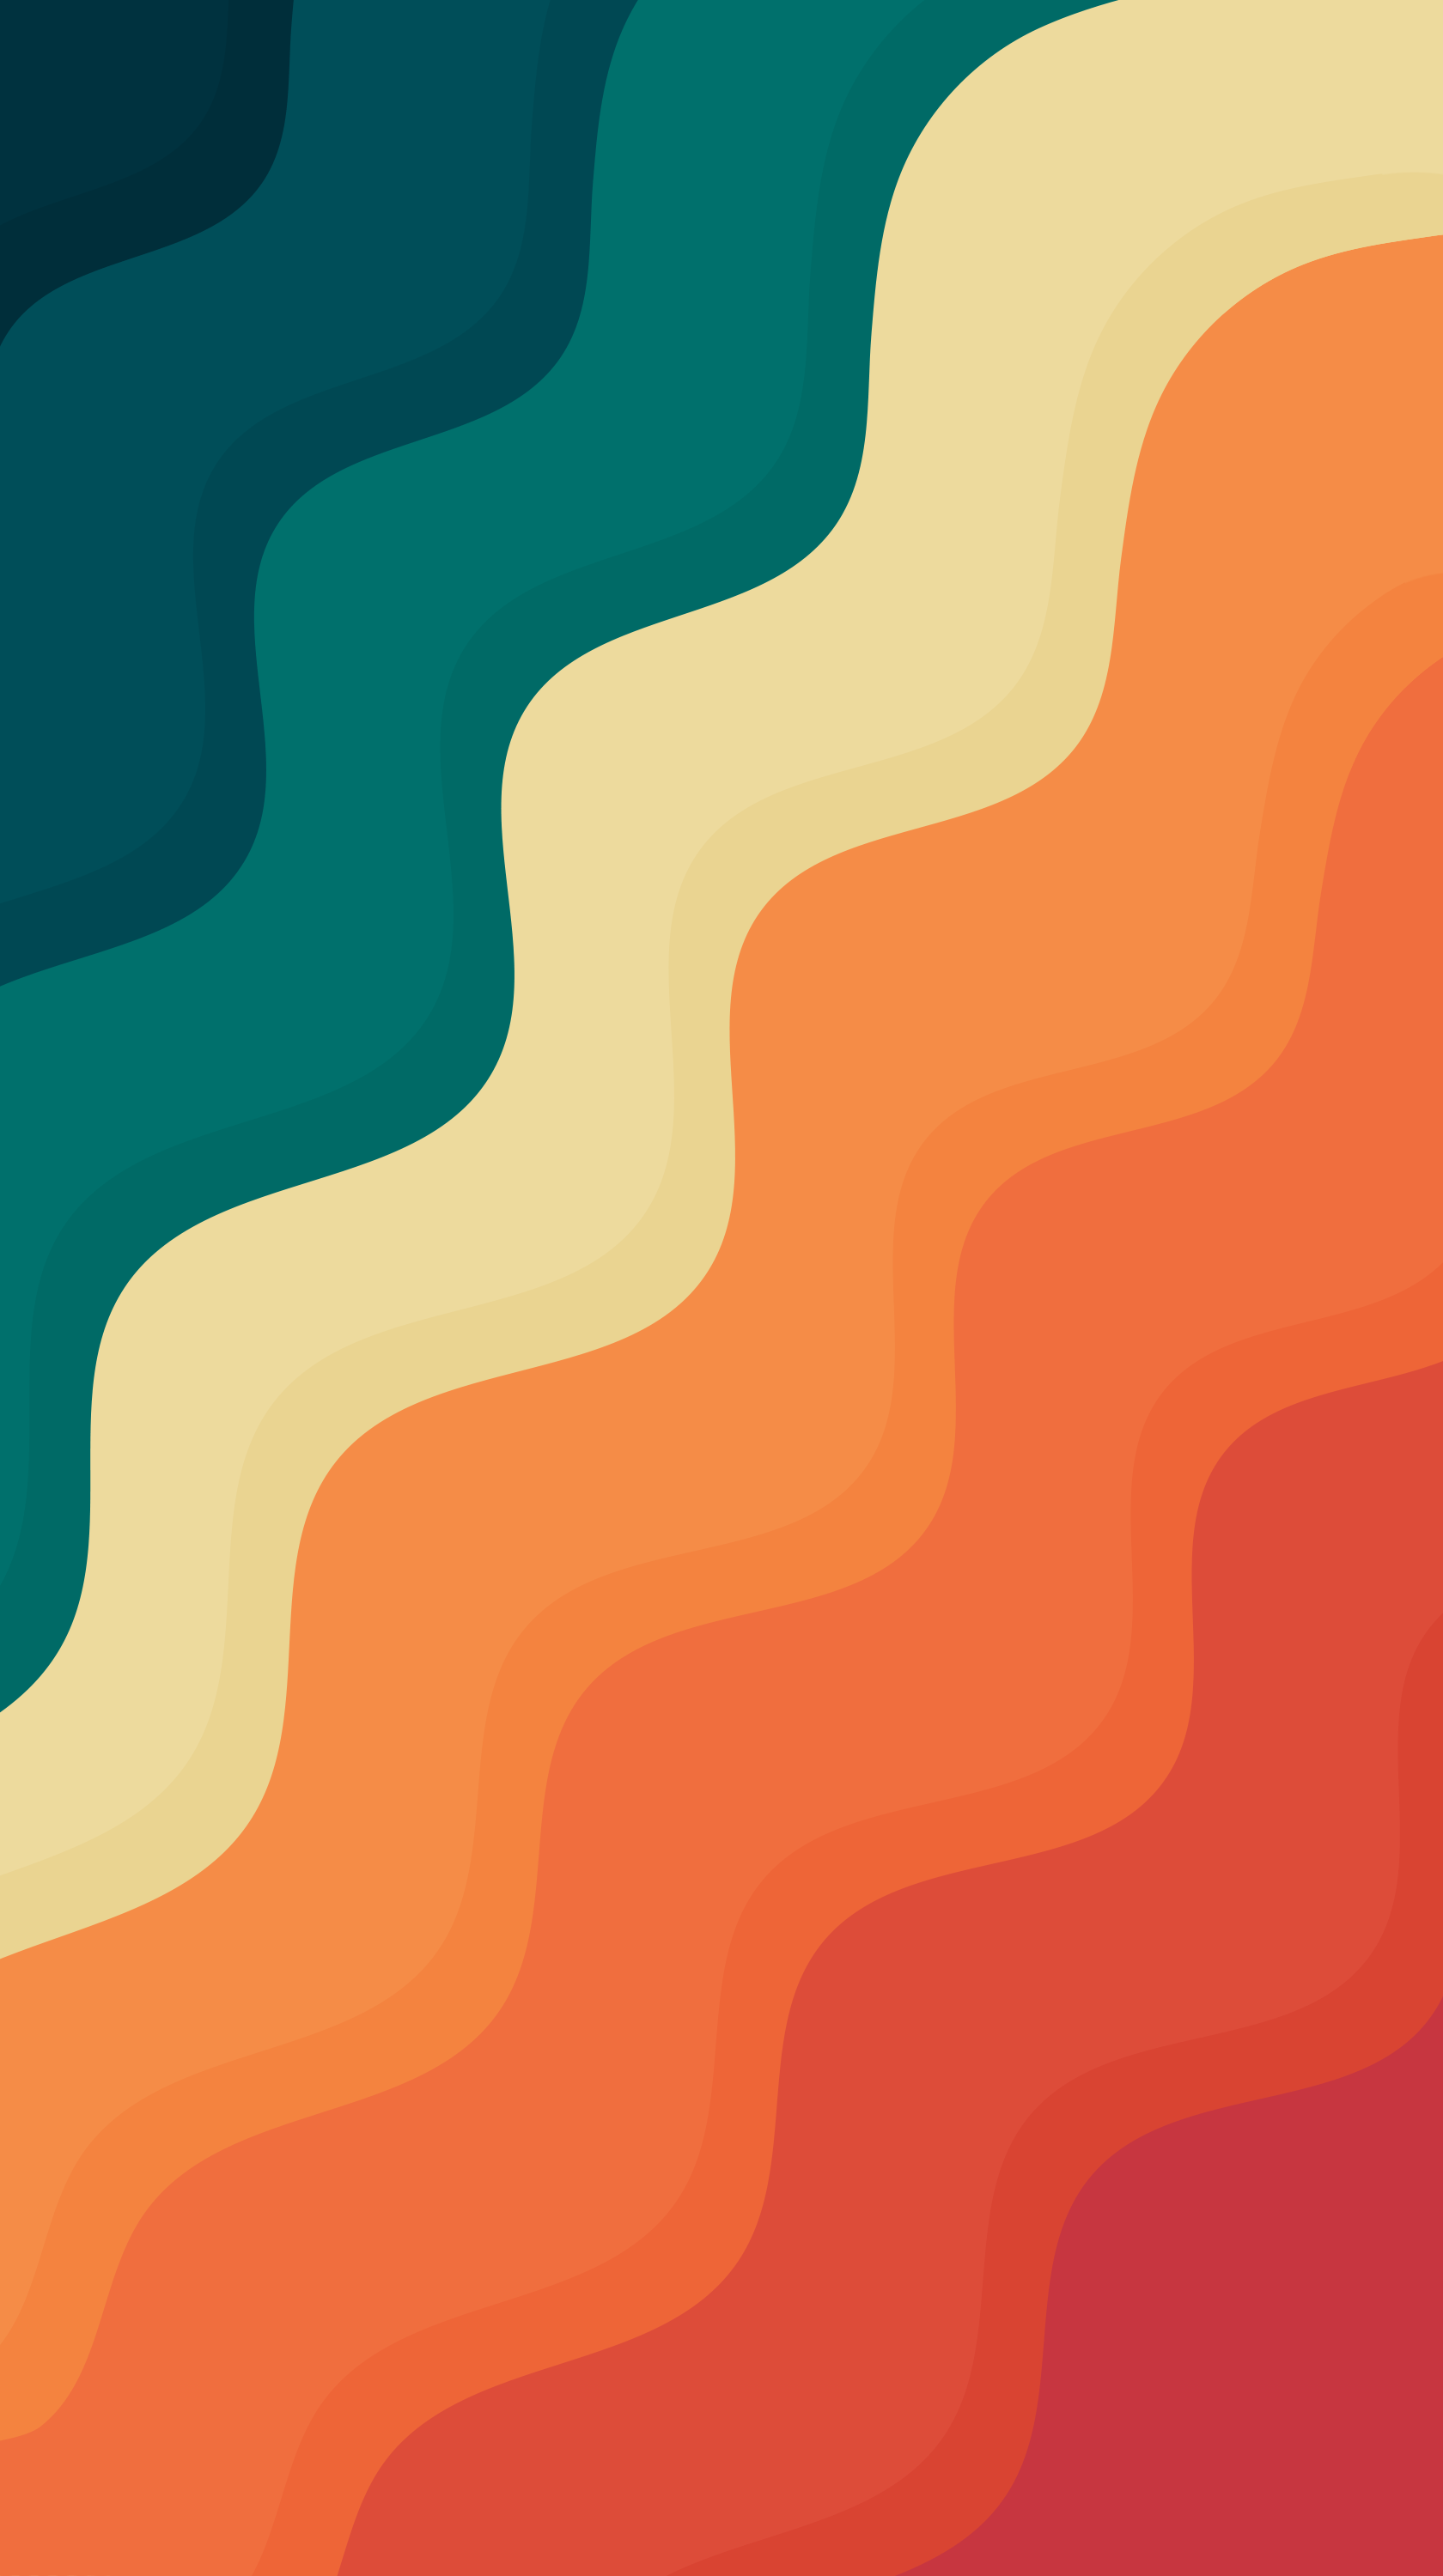 An image of a colorful abstract background with wavy lines in retro colors. - Clean